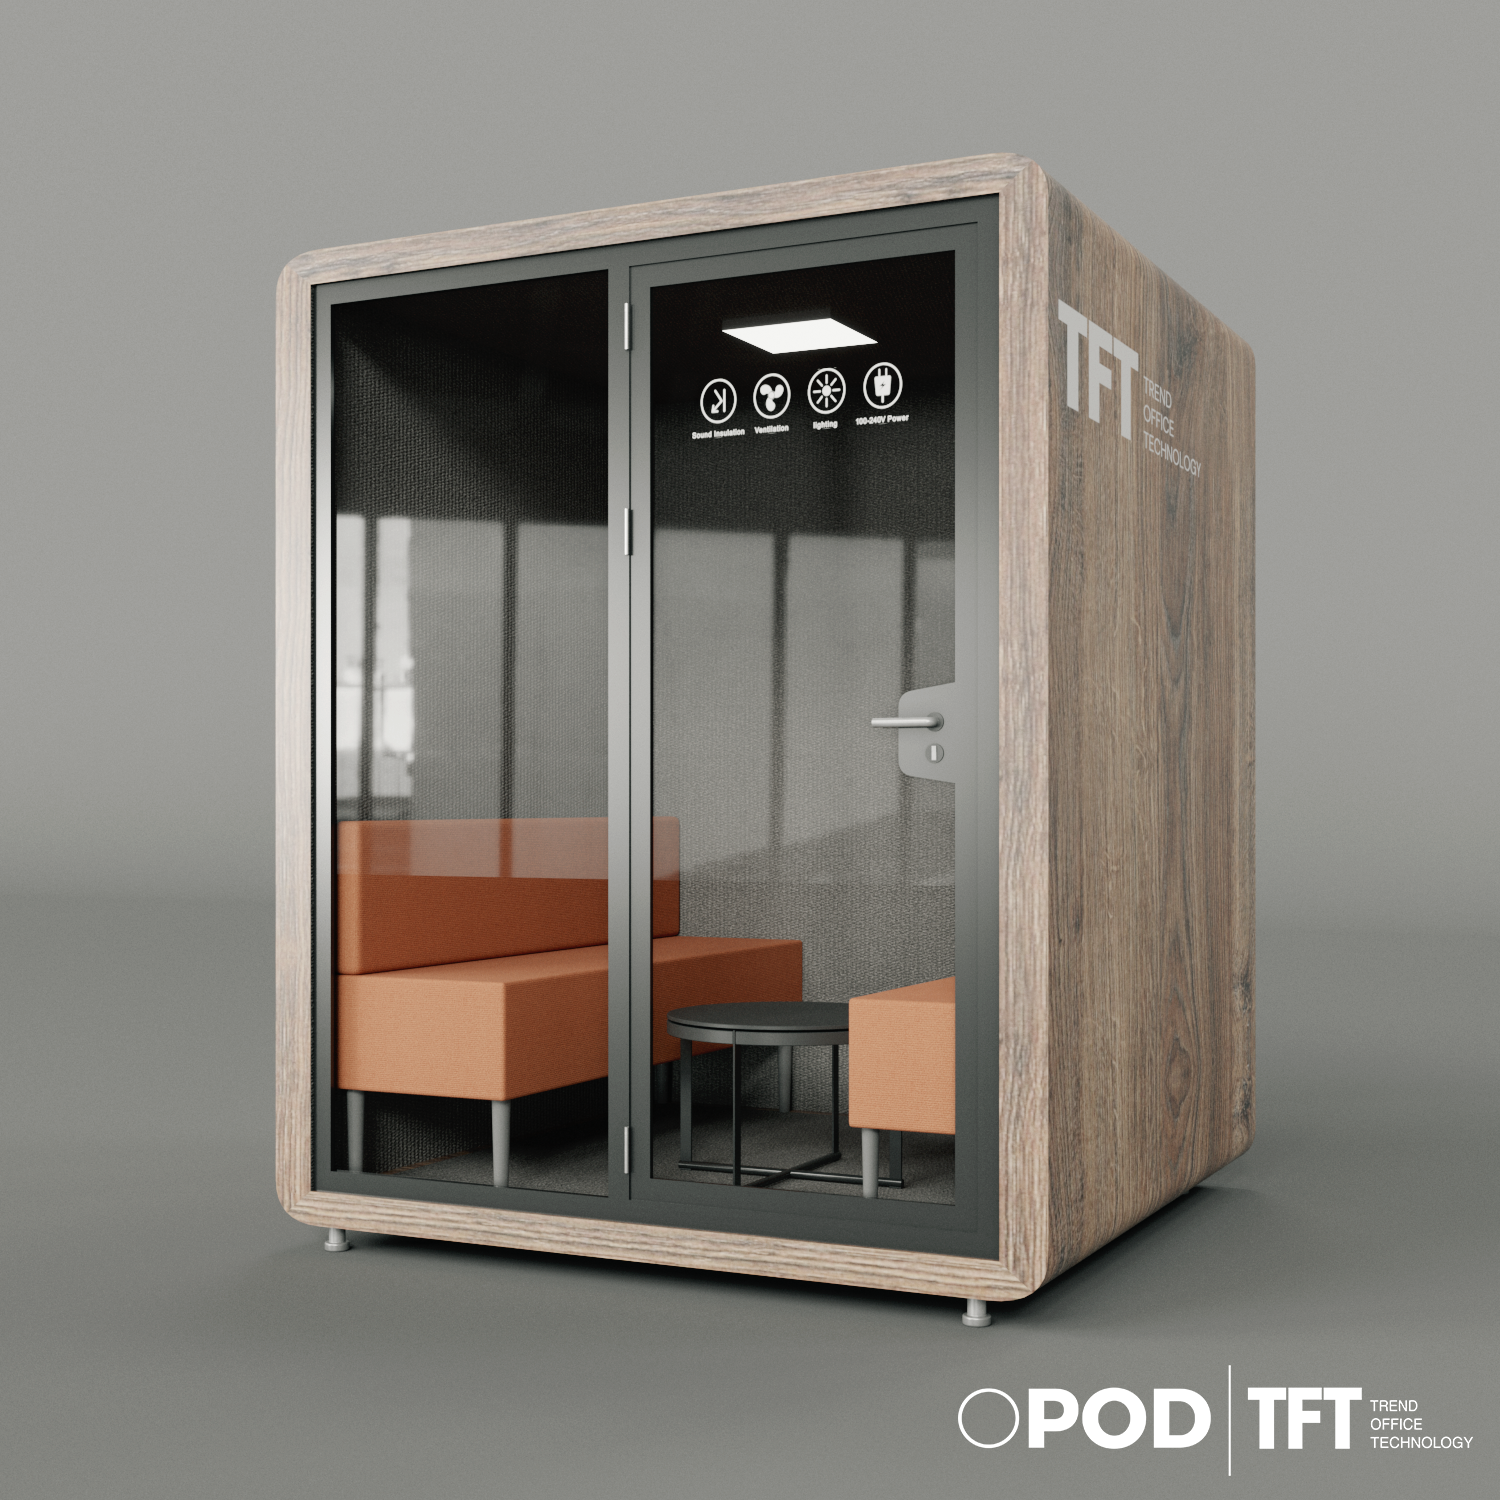 Meeting Room Pods Office Booths Meeting Pods for Offices Europe France, Germany, Spain, Ireland, Italy, Netherlands